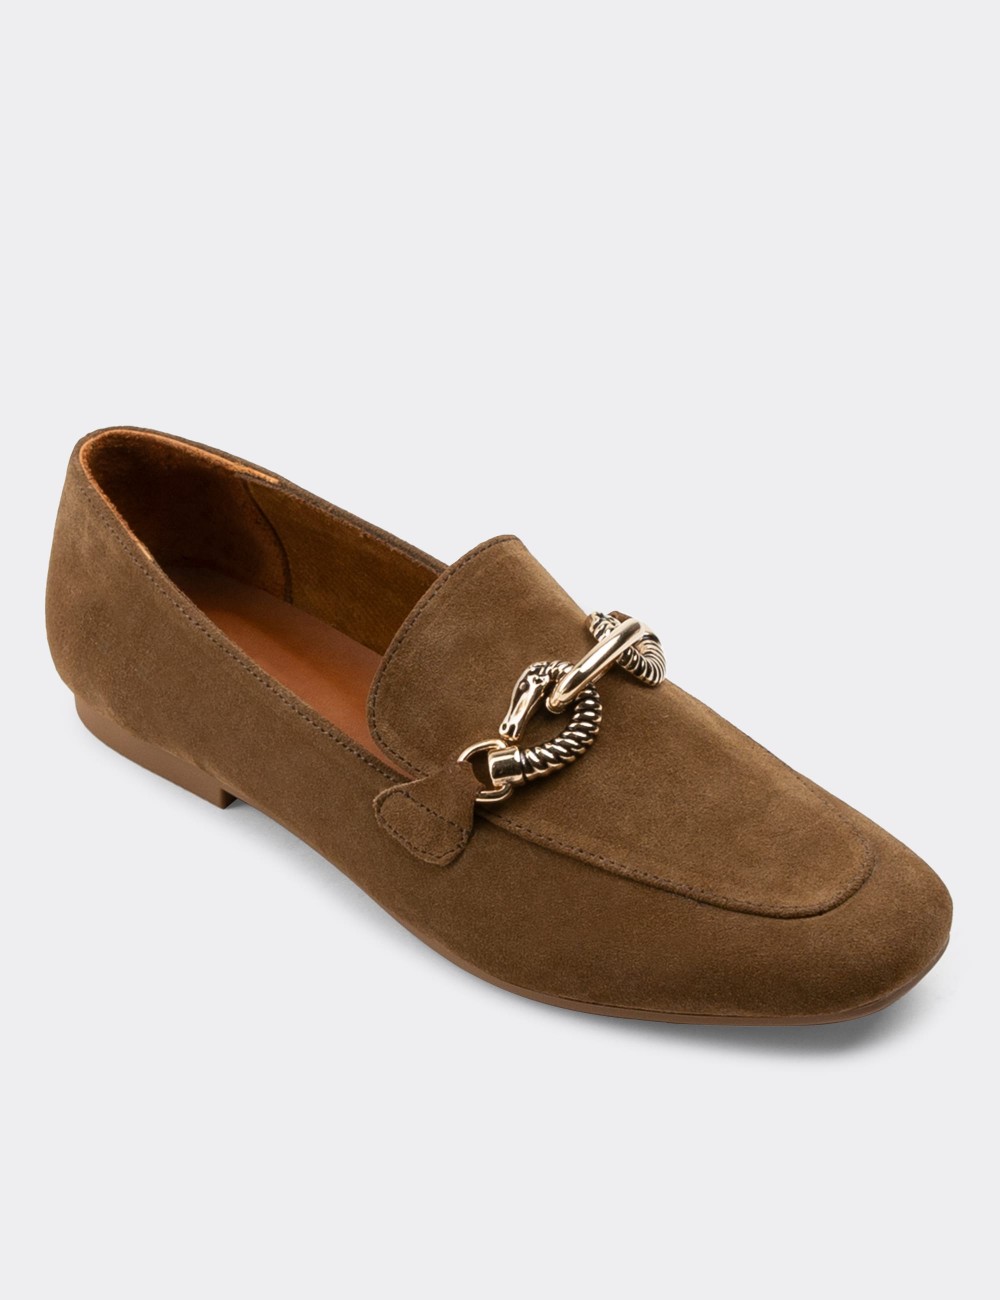 Tan Suede Leather Loafers - 01912ZTBAC02